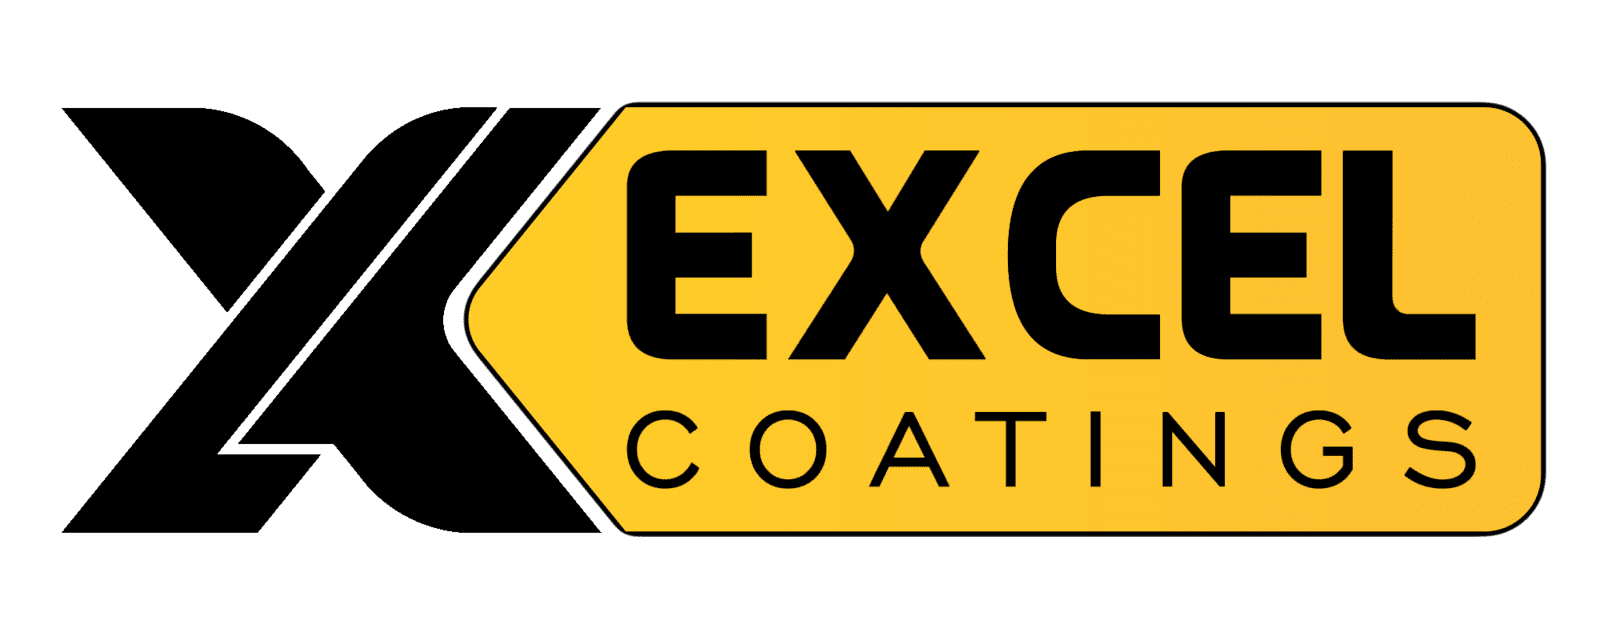 EXCEL COATINGS - Heat Reflective Cool Roof Paint / High SRI paint to reduce roof heat